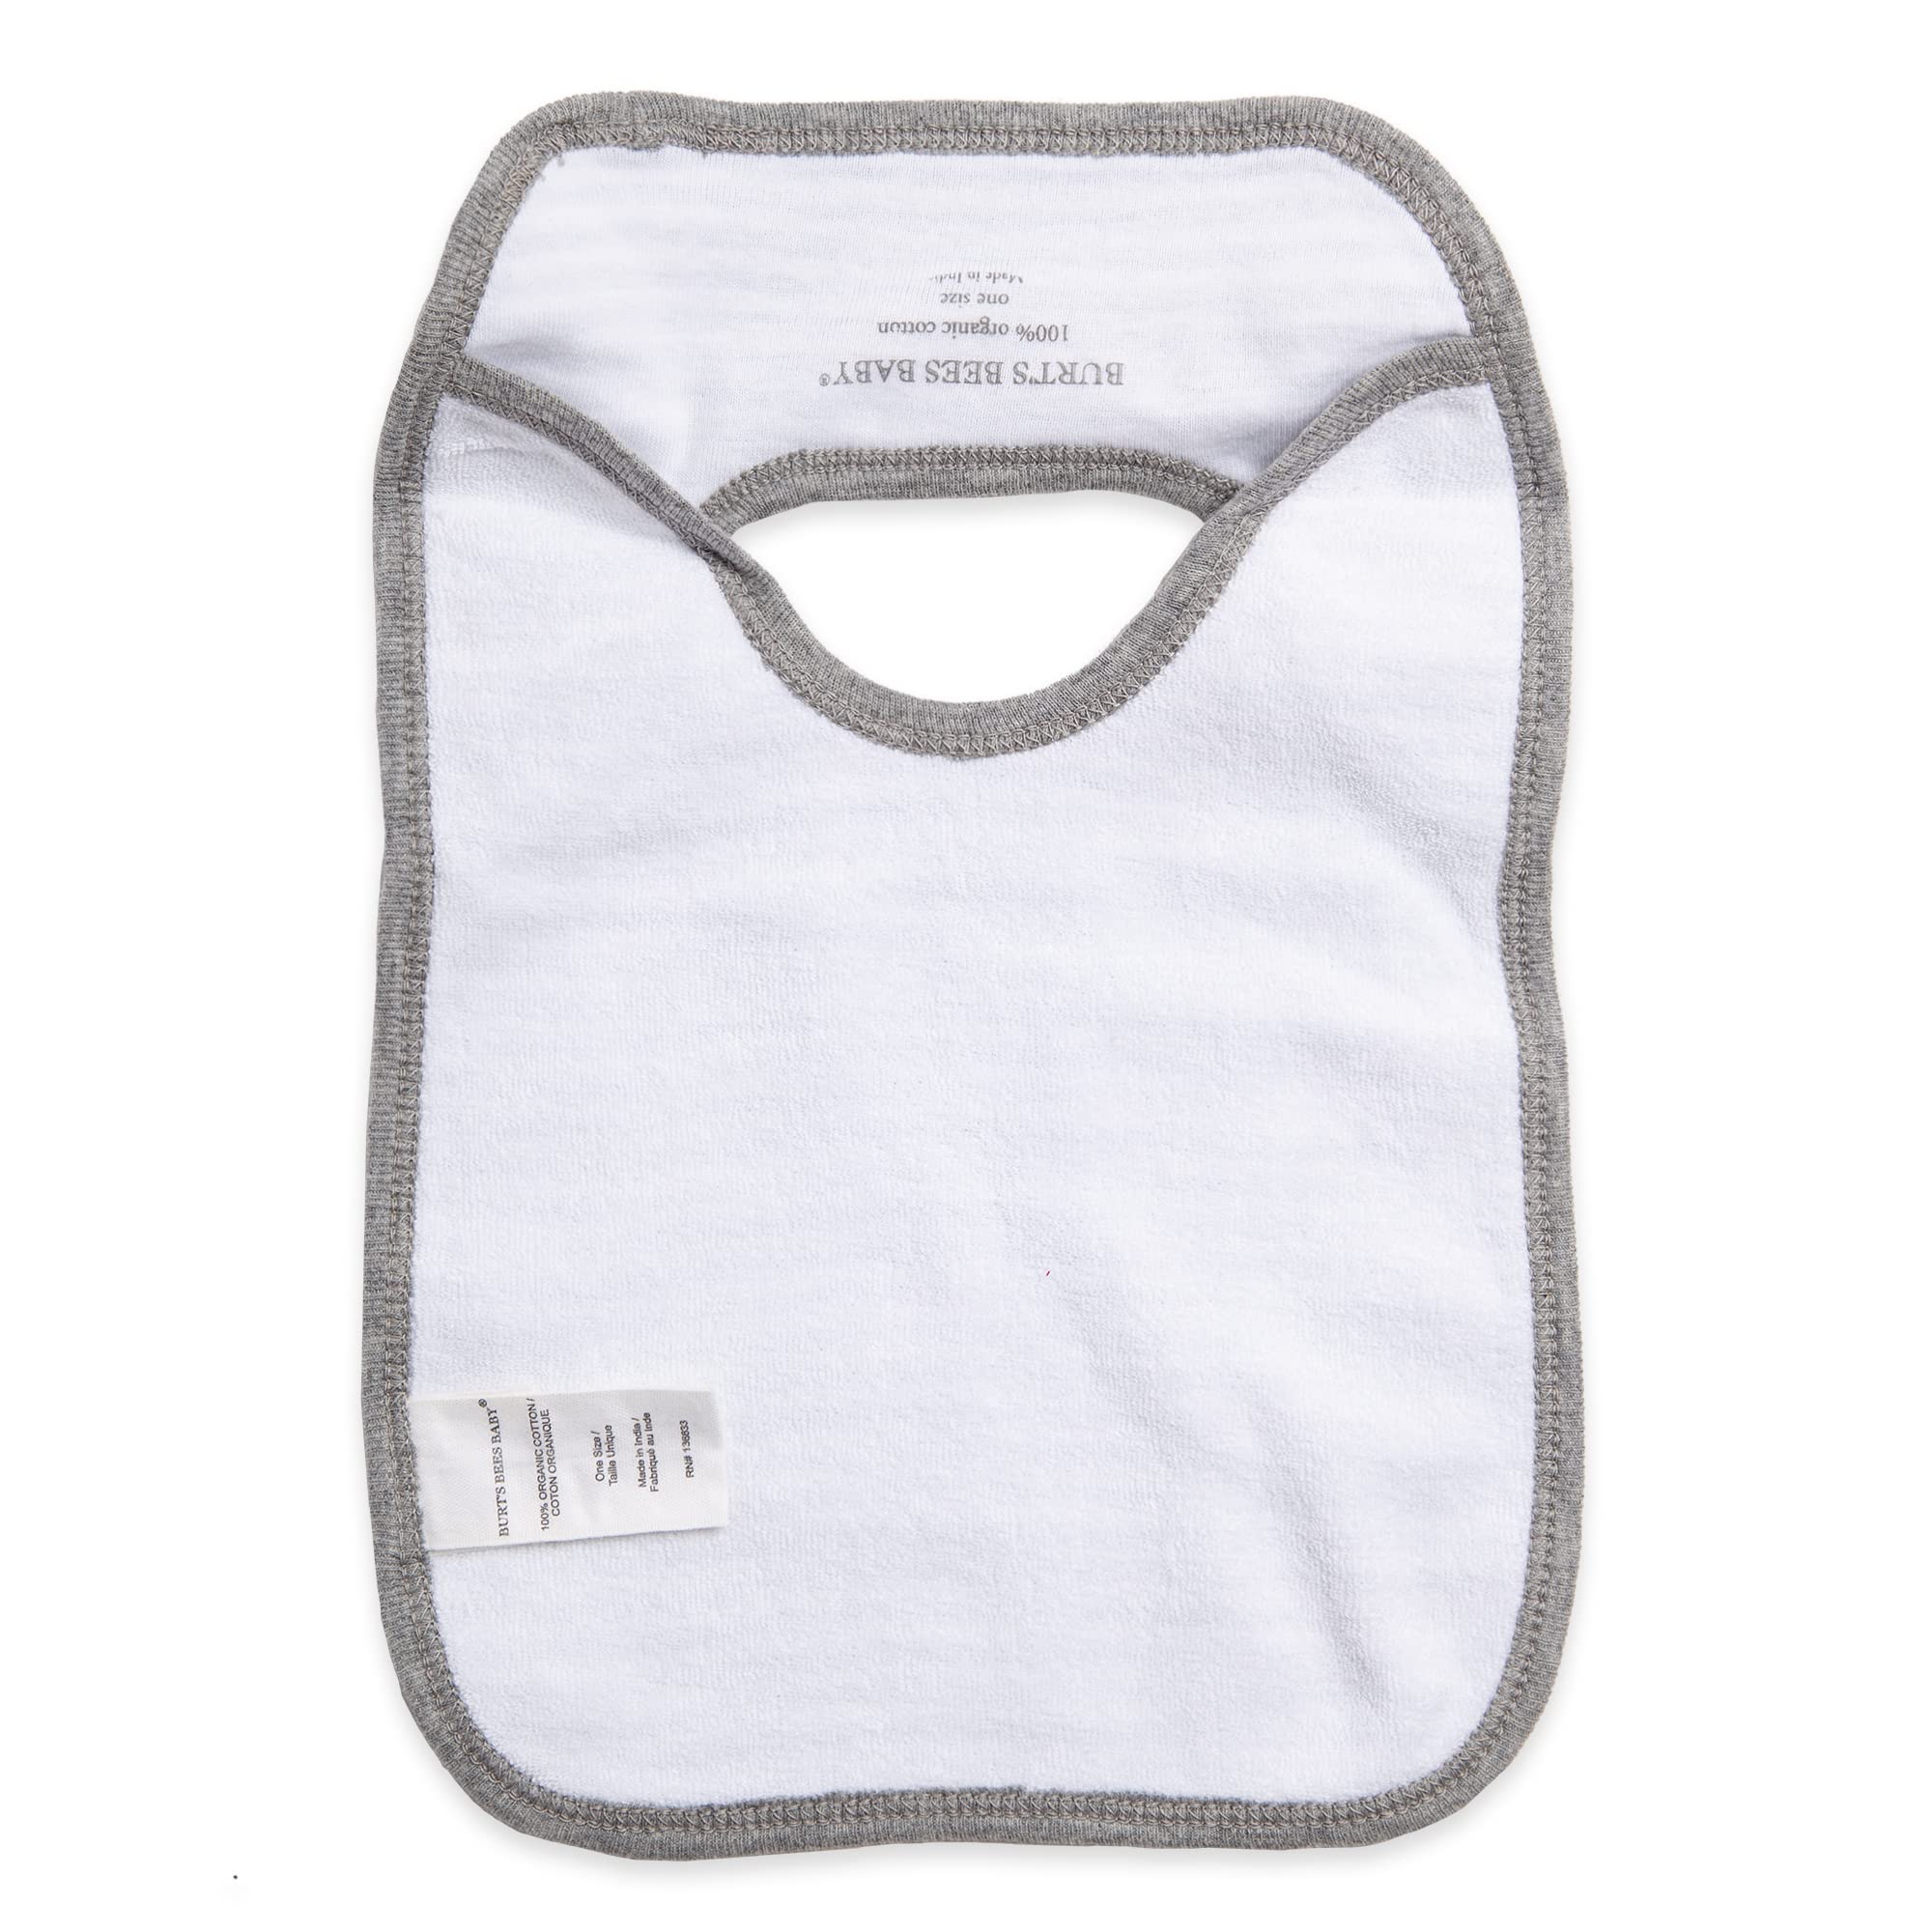 Burt's Bees Baby Unisex Baby Bibs, Lap-shoulder Drool Cloths, 100% Organic Cotton With Absorbent Terry Towel Backing